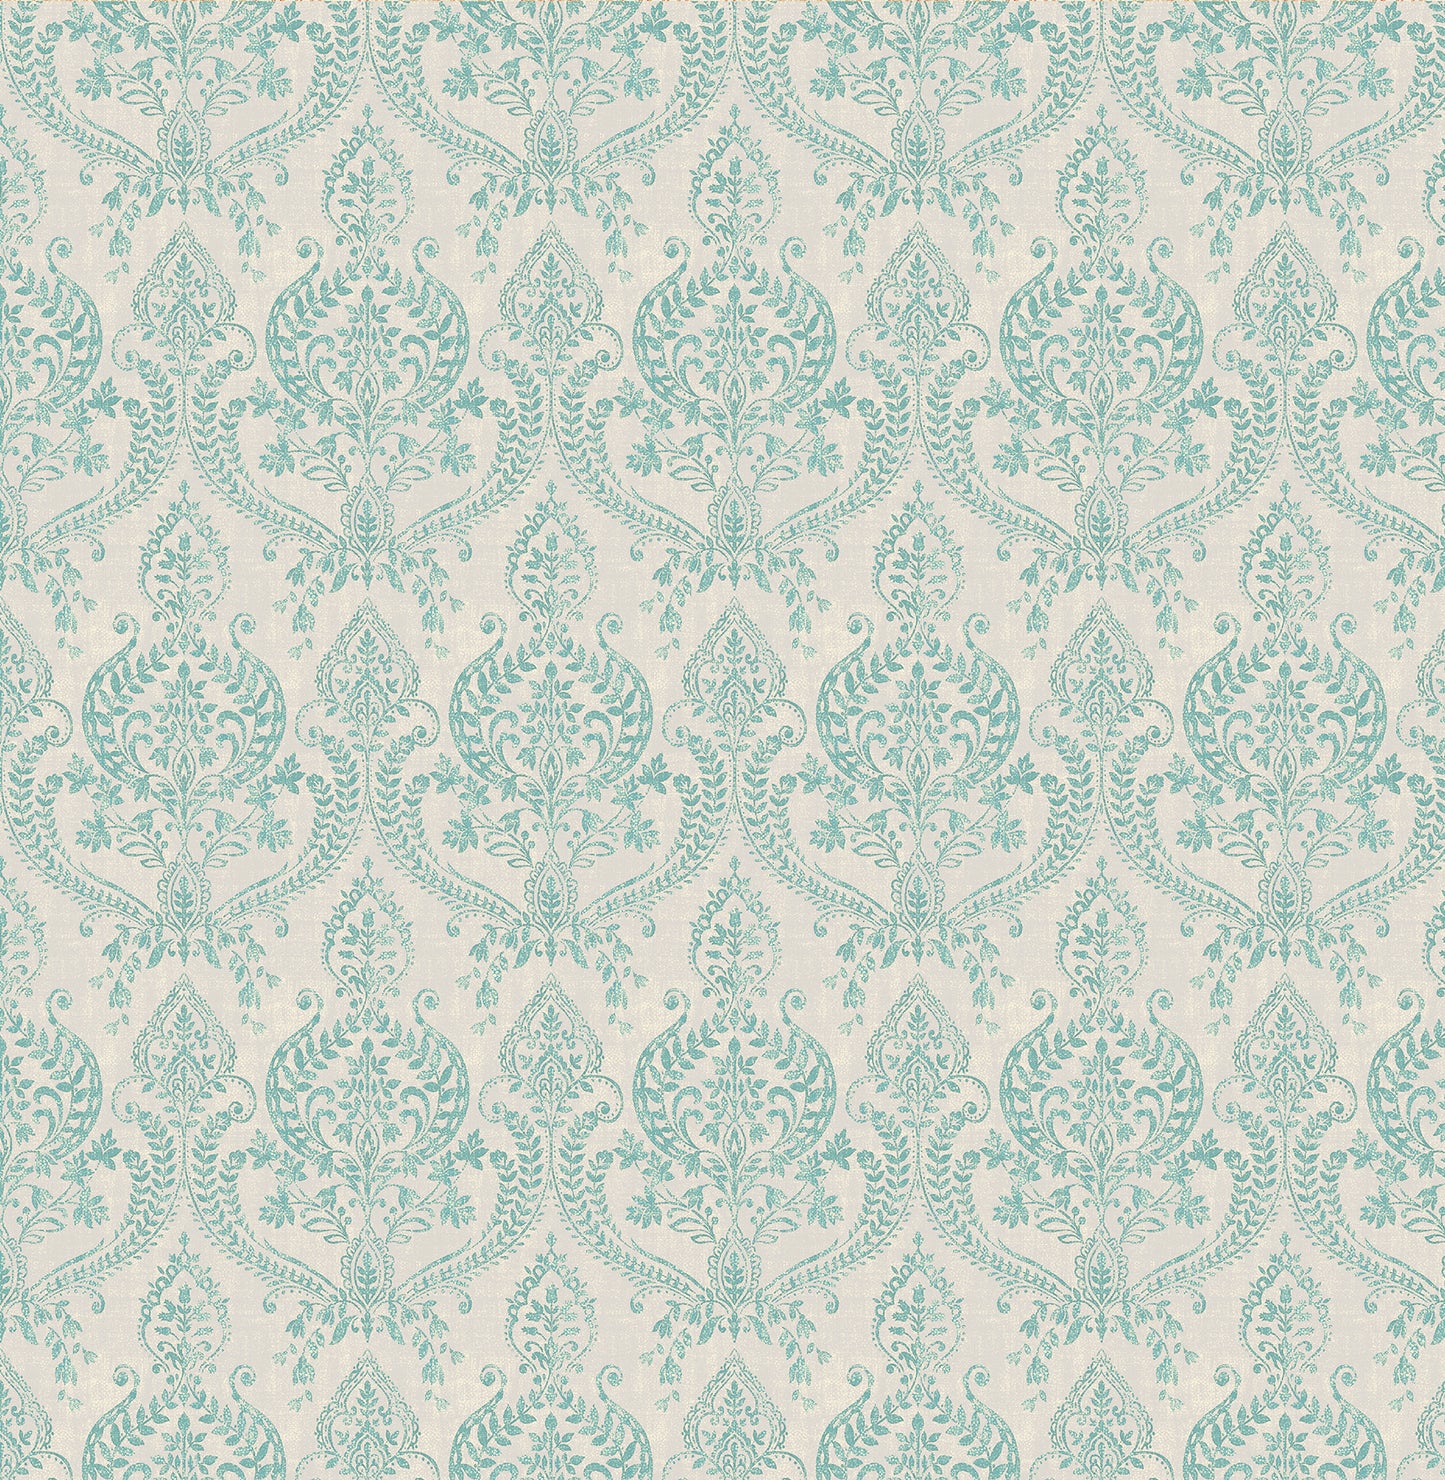 Find 1014-001819 Kismet Turquoise Waverly Turquoise Petite Damask Wallpaper A Street Prints Wallpaper